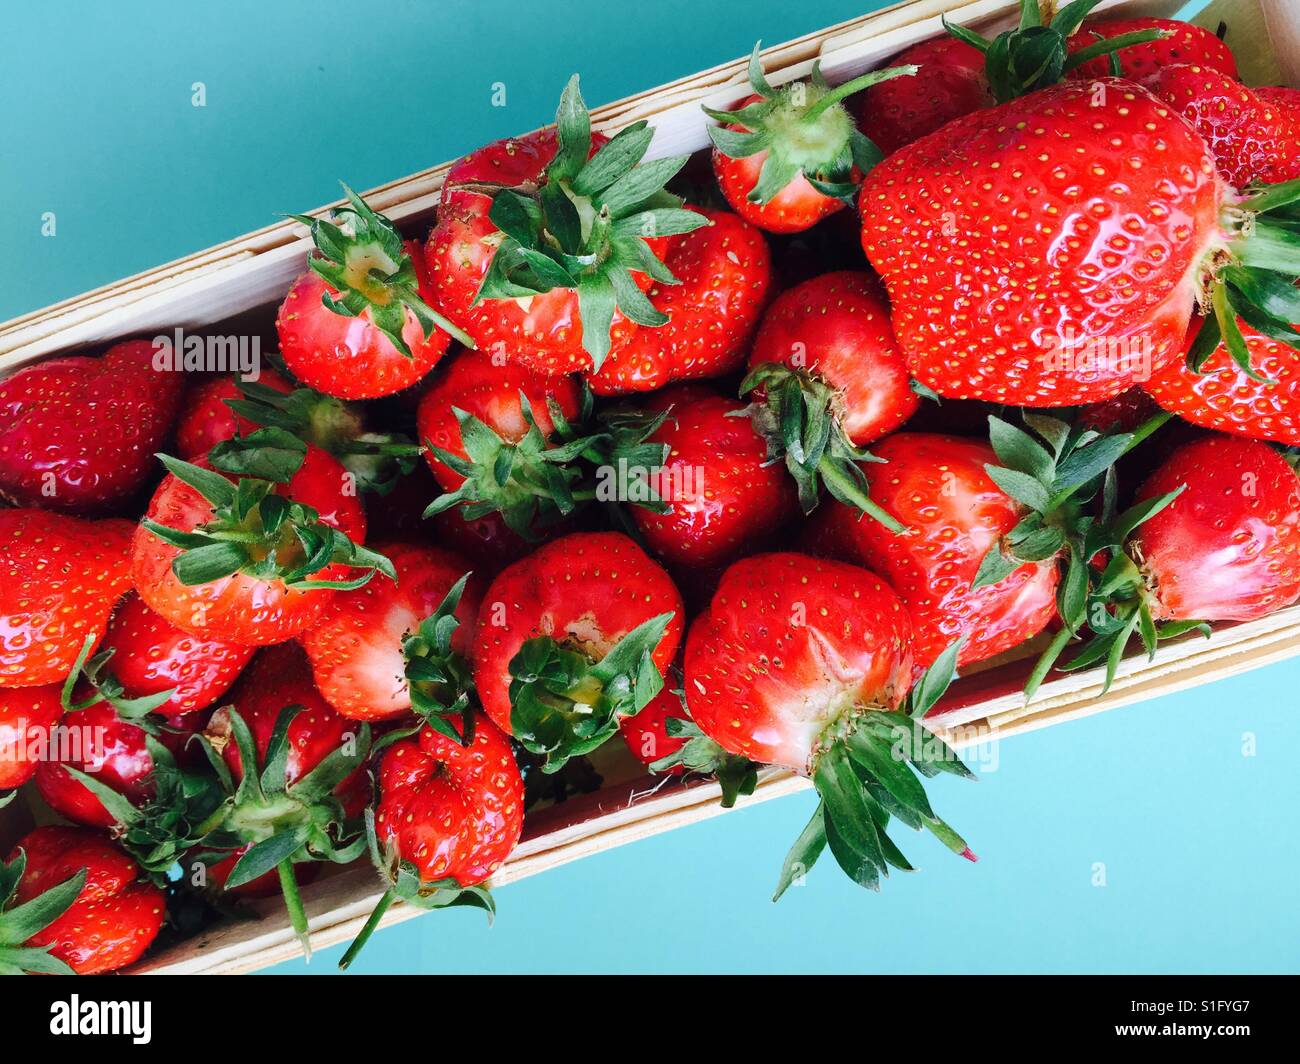 Be openminded for a new perspective - strawberries from up above Stock Photo